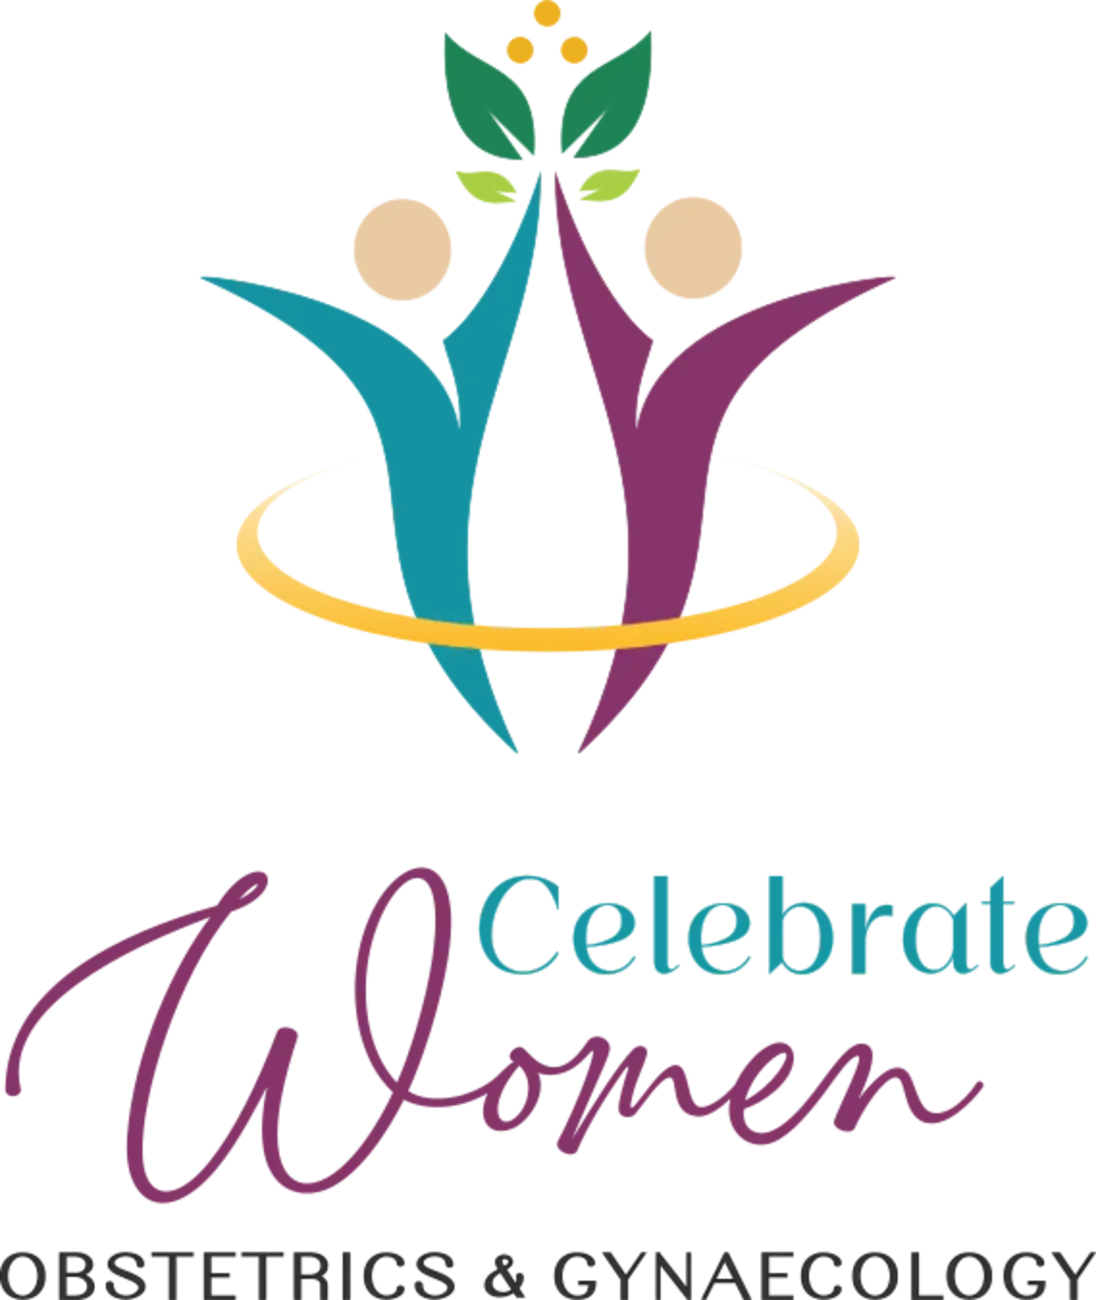 Celebrate Women logo, for obstetrics and gynaecology needs in the Bundaberg region